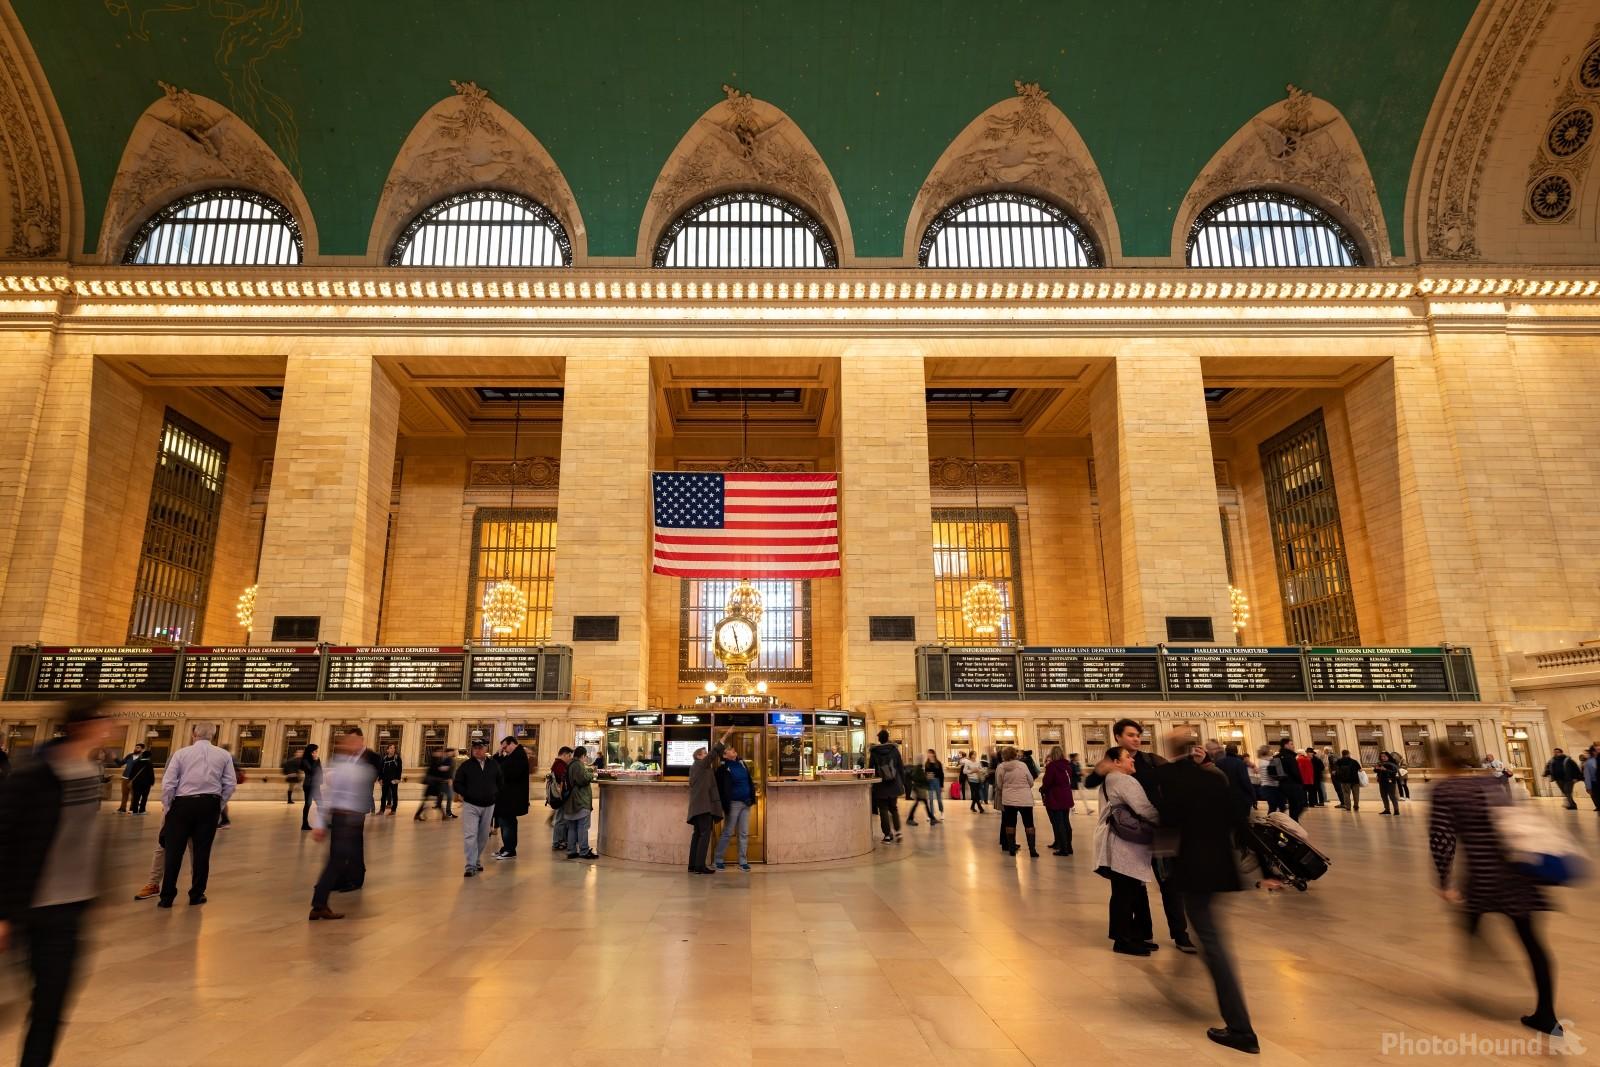 Image of Grand Central Terminal by VOJTa Herout